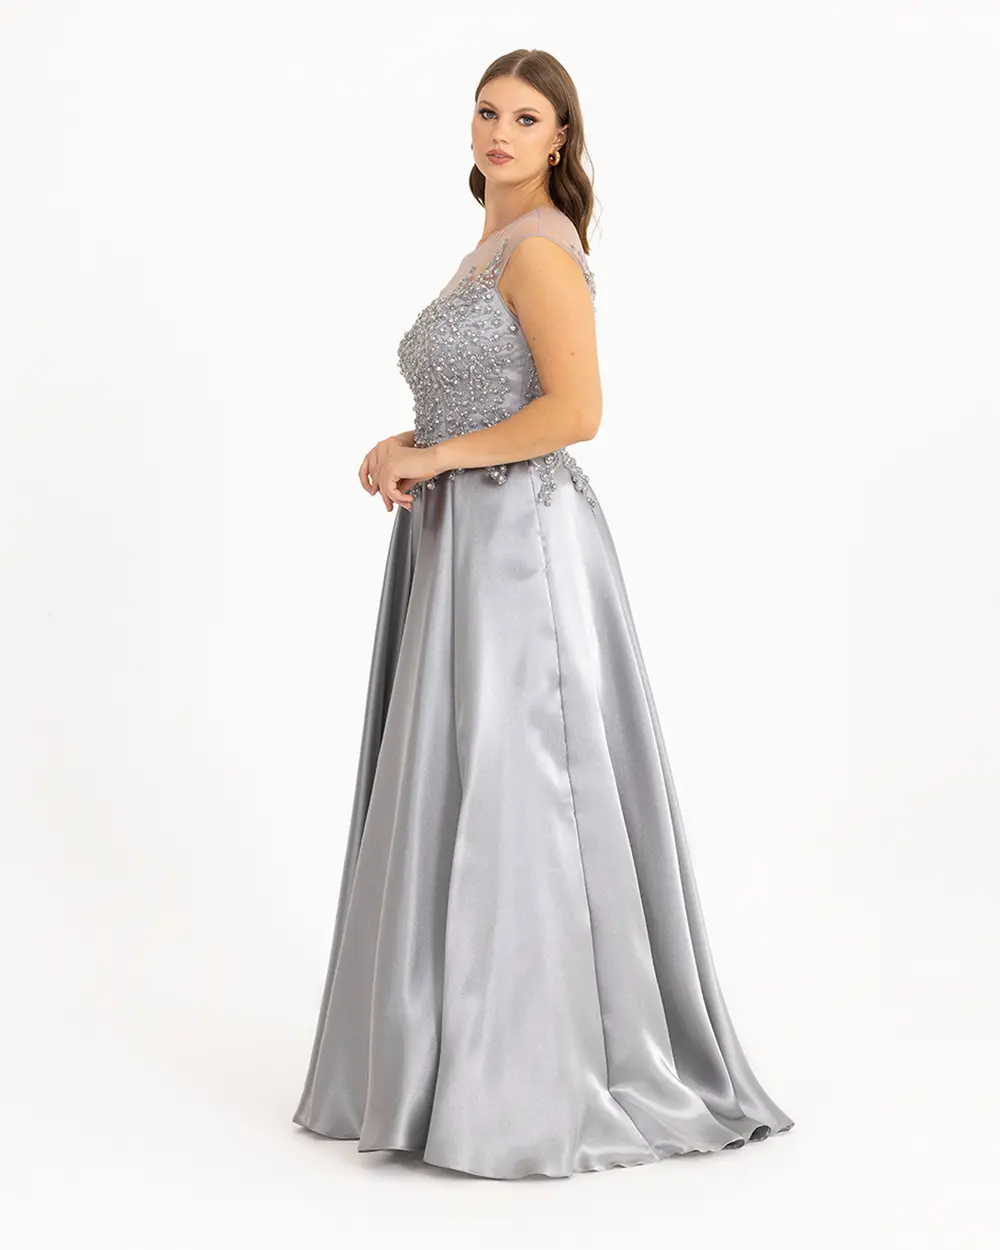  Plus Size Indian Accessoried Satin Look Evening Dress